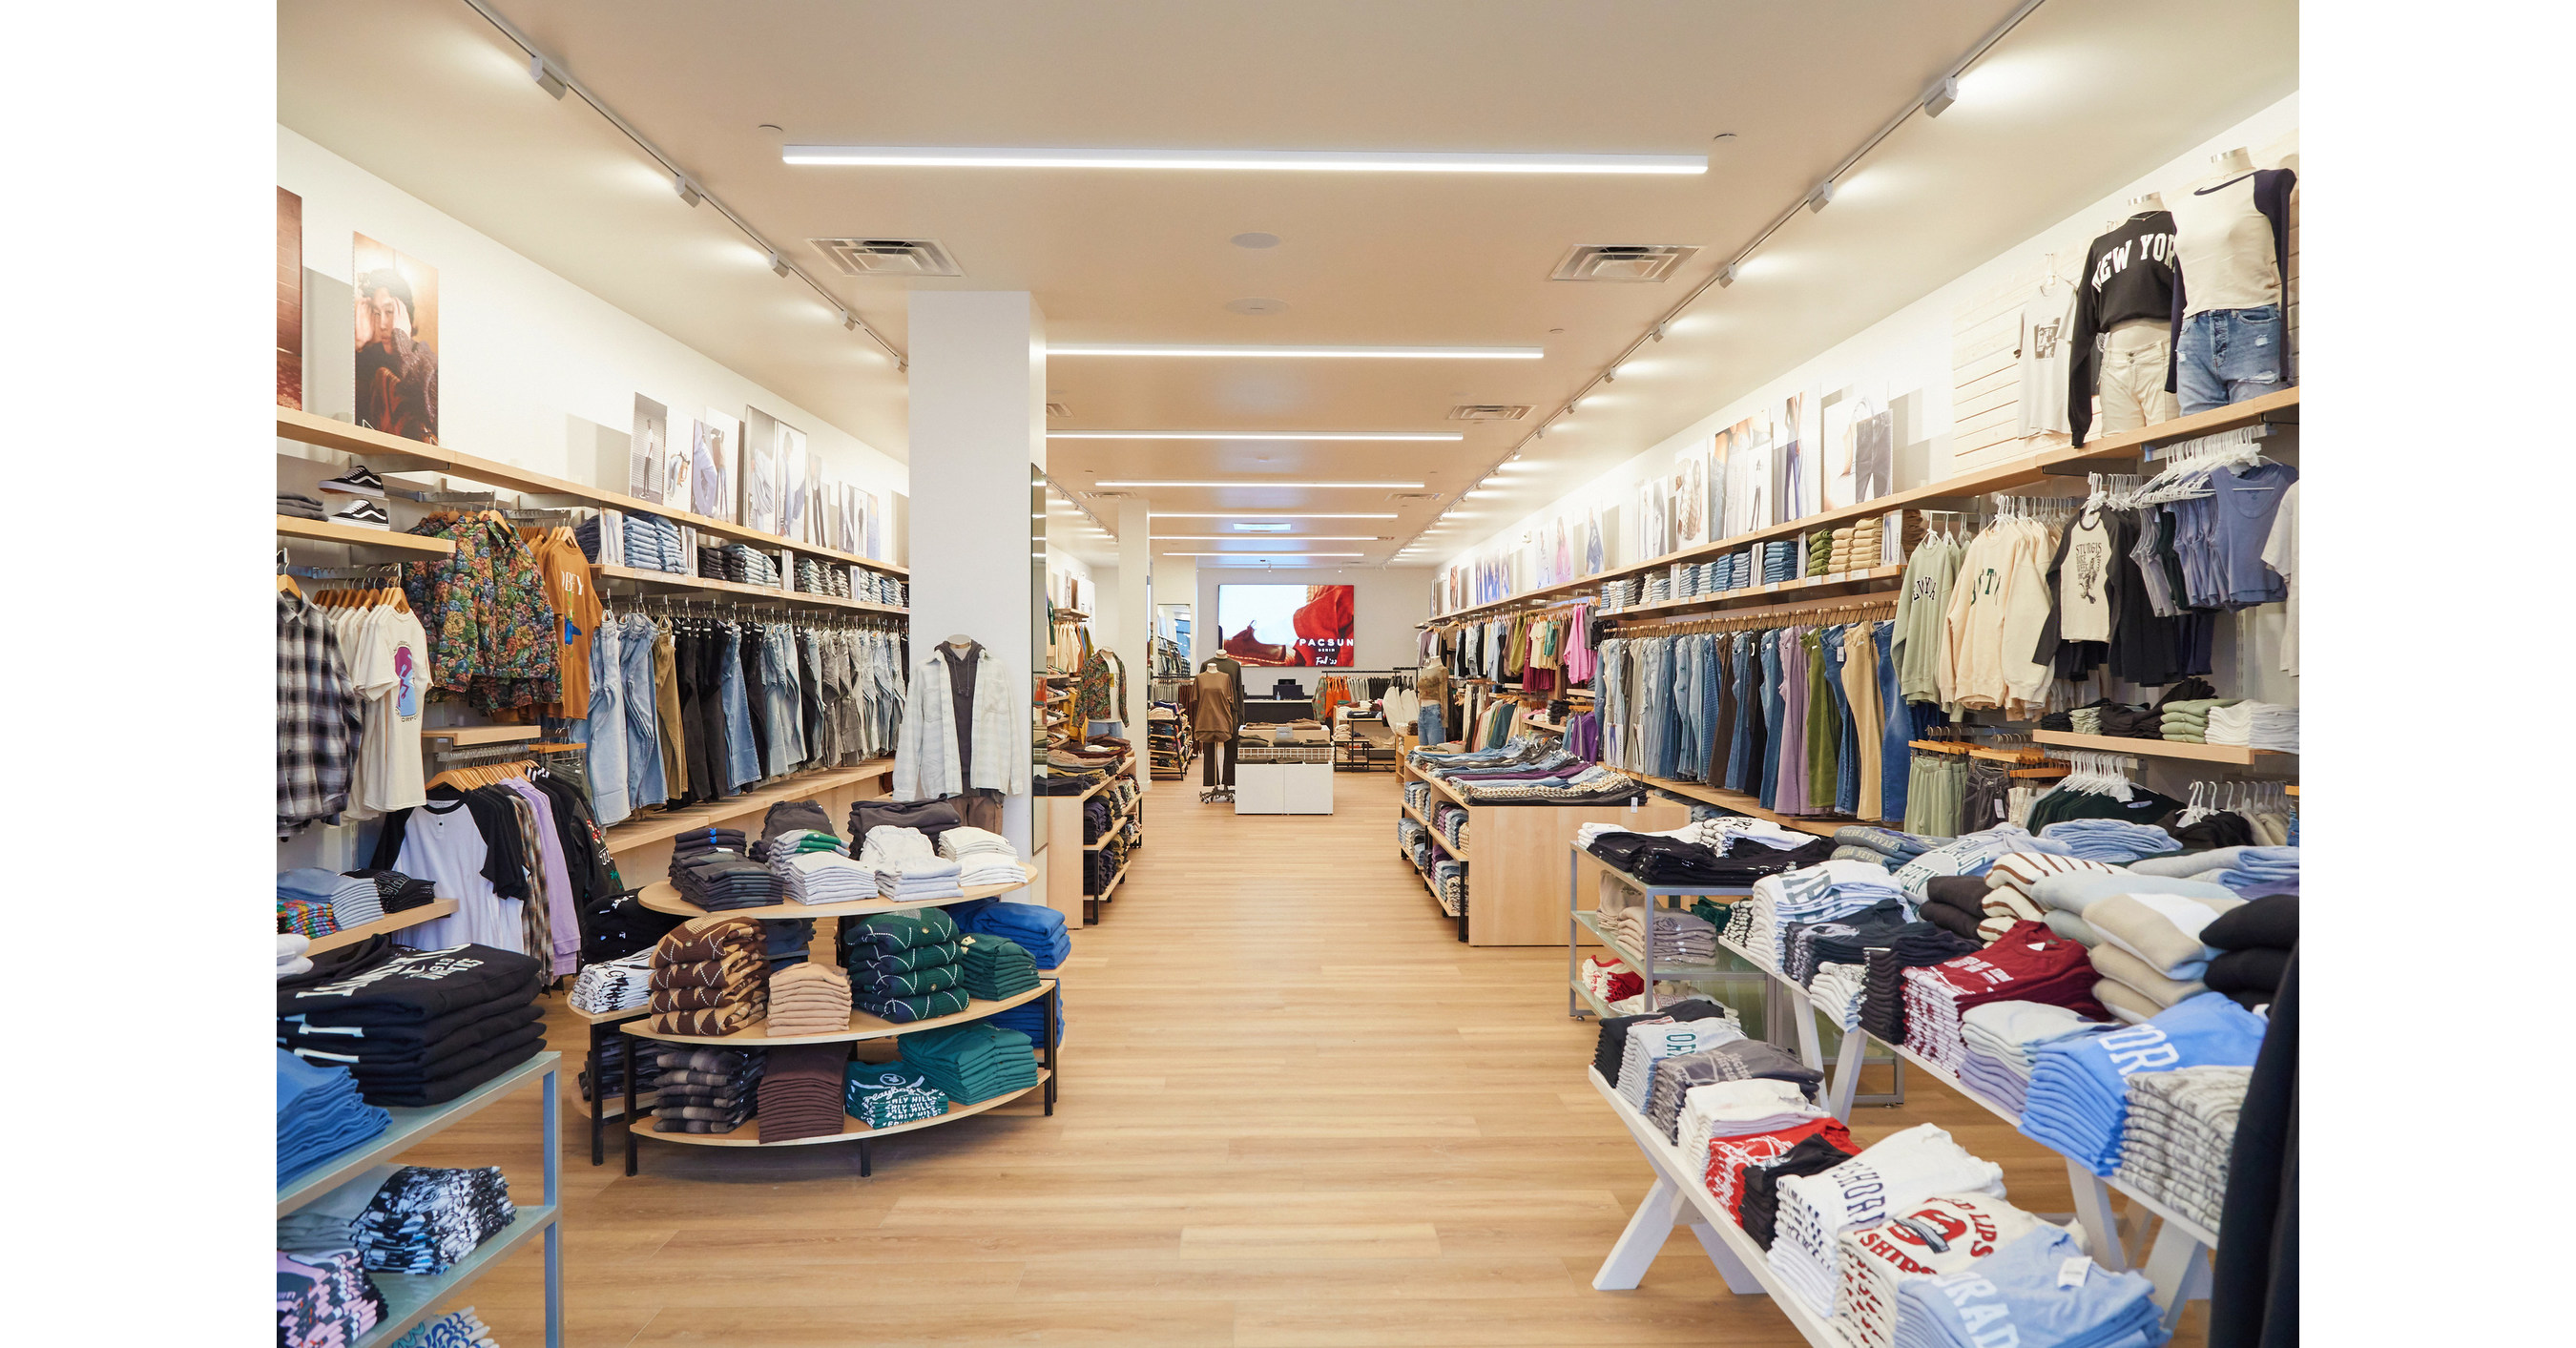 PACSUN EXPANDS SOCAL FOOTPRINT WITH NEW OPENING IN SAN DIEGO